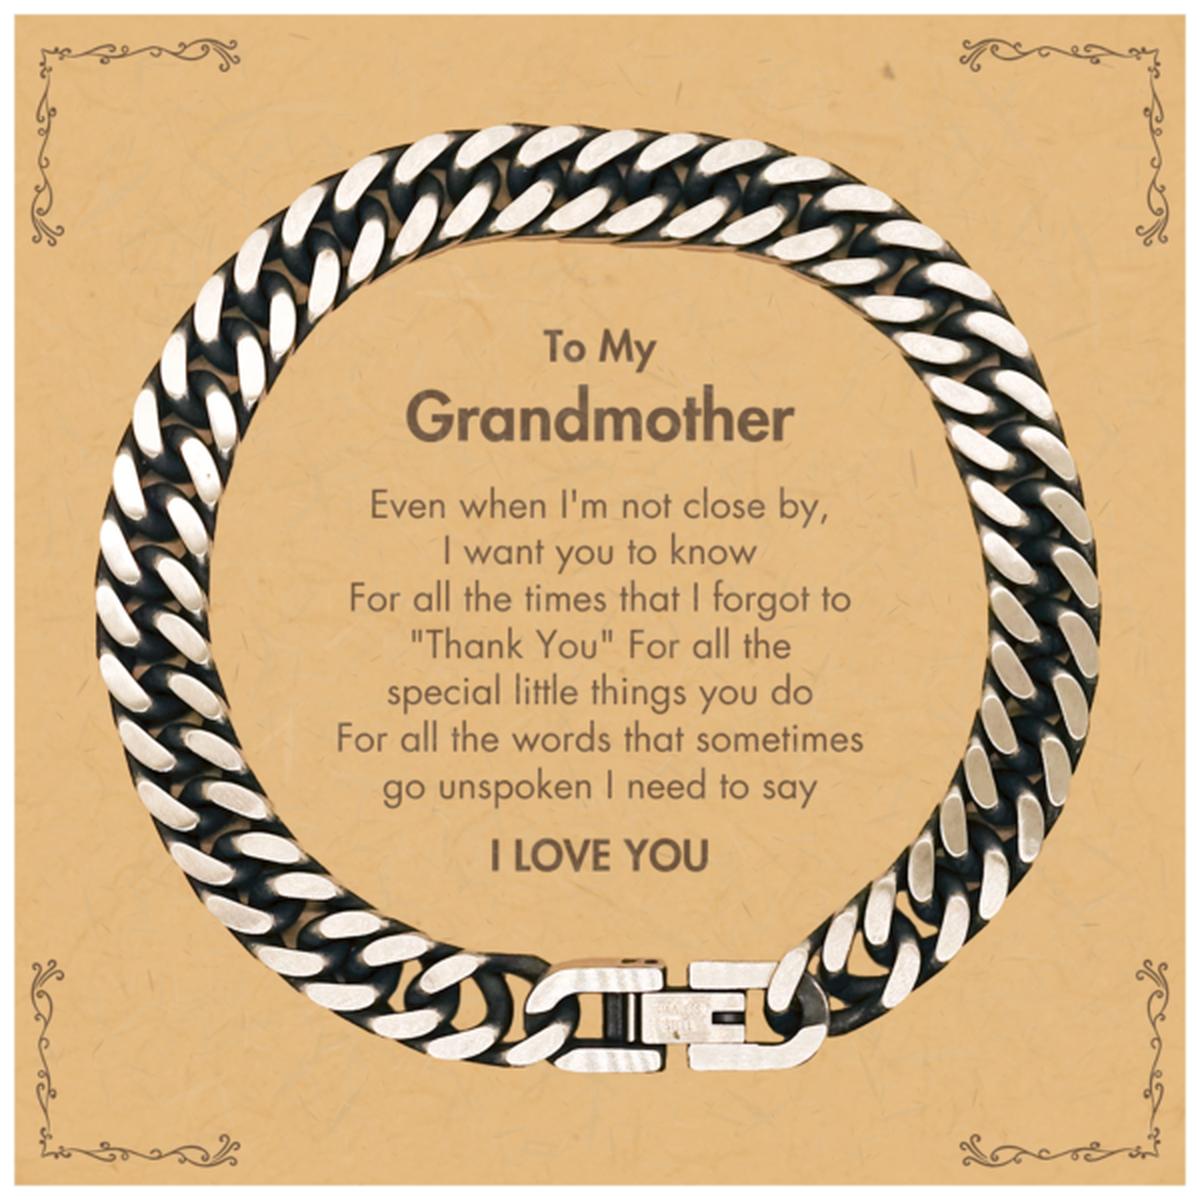 Thank You Gifts for Grandmother, Keepsake Cuban Link Chain Bracelet Gifts for Grandmother Birthday Mother's day Father's Day Grandmother For all the words That sometimes go unspoken I need to say I LOVE YOU